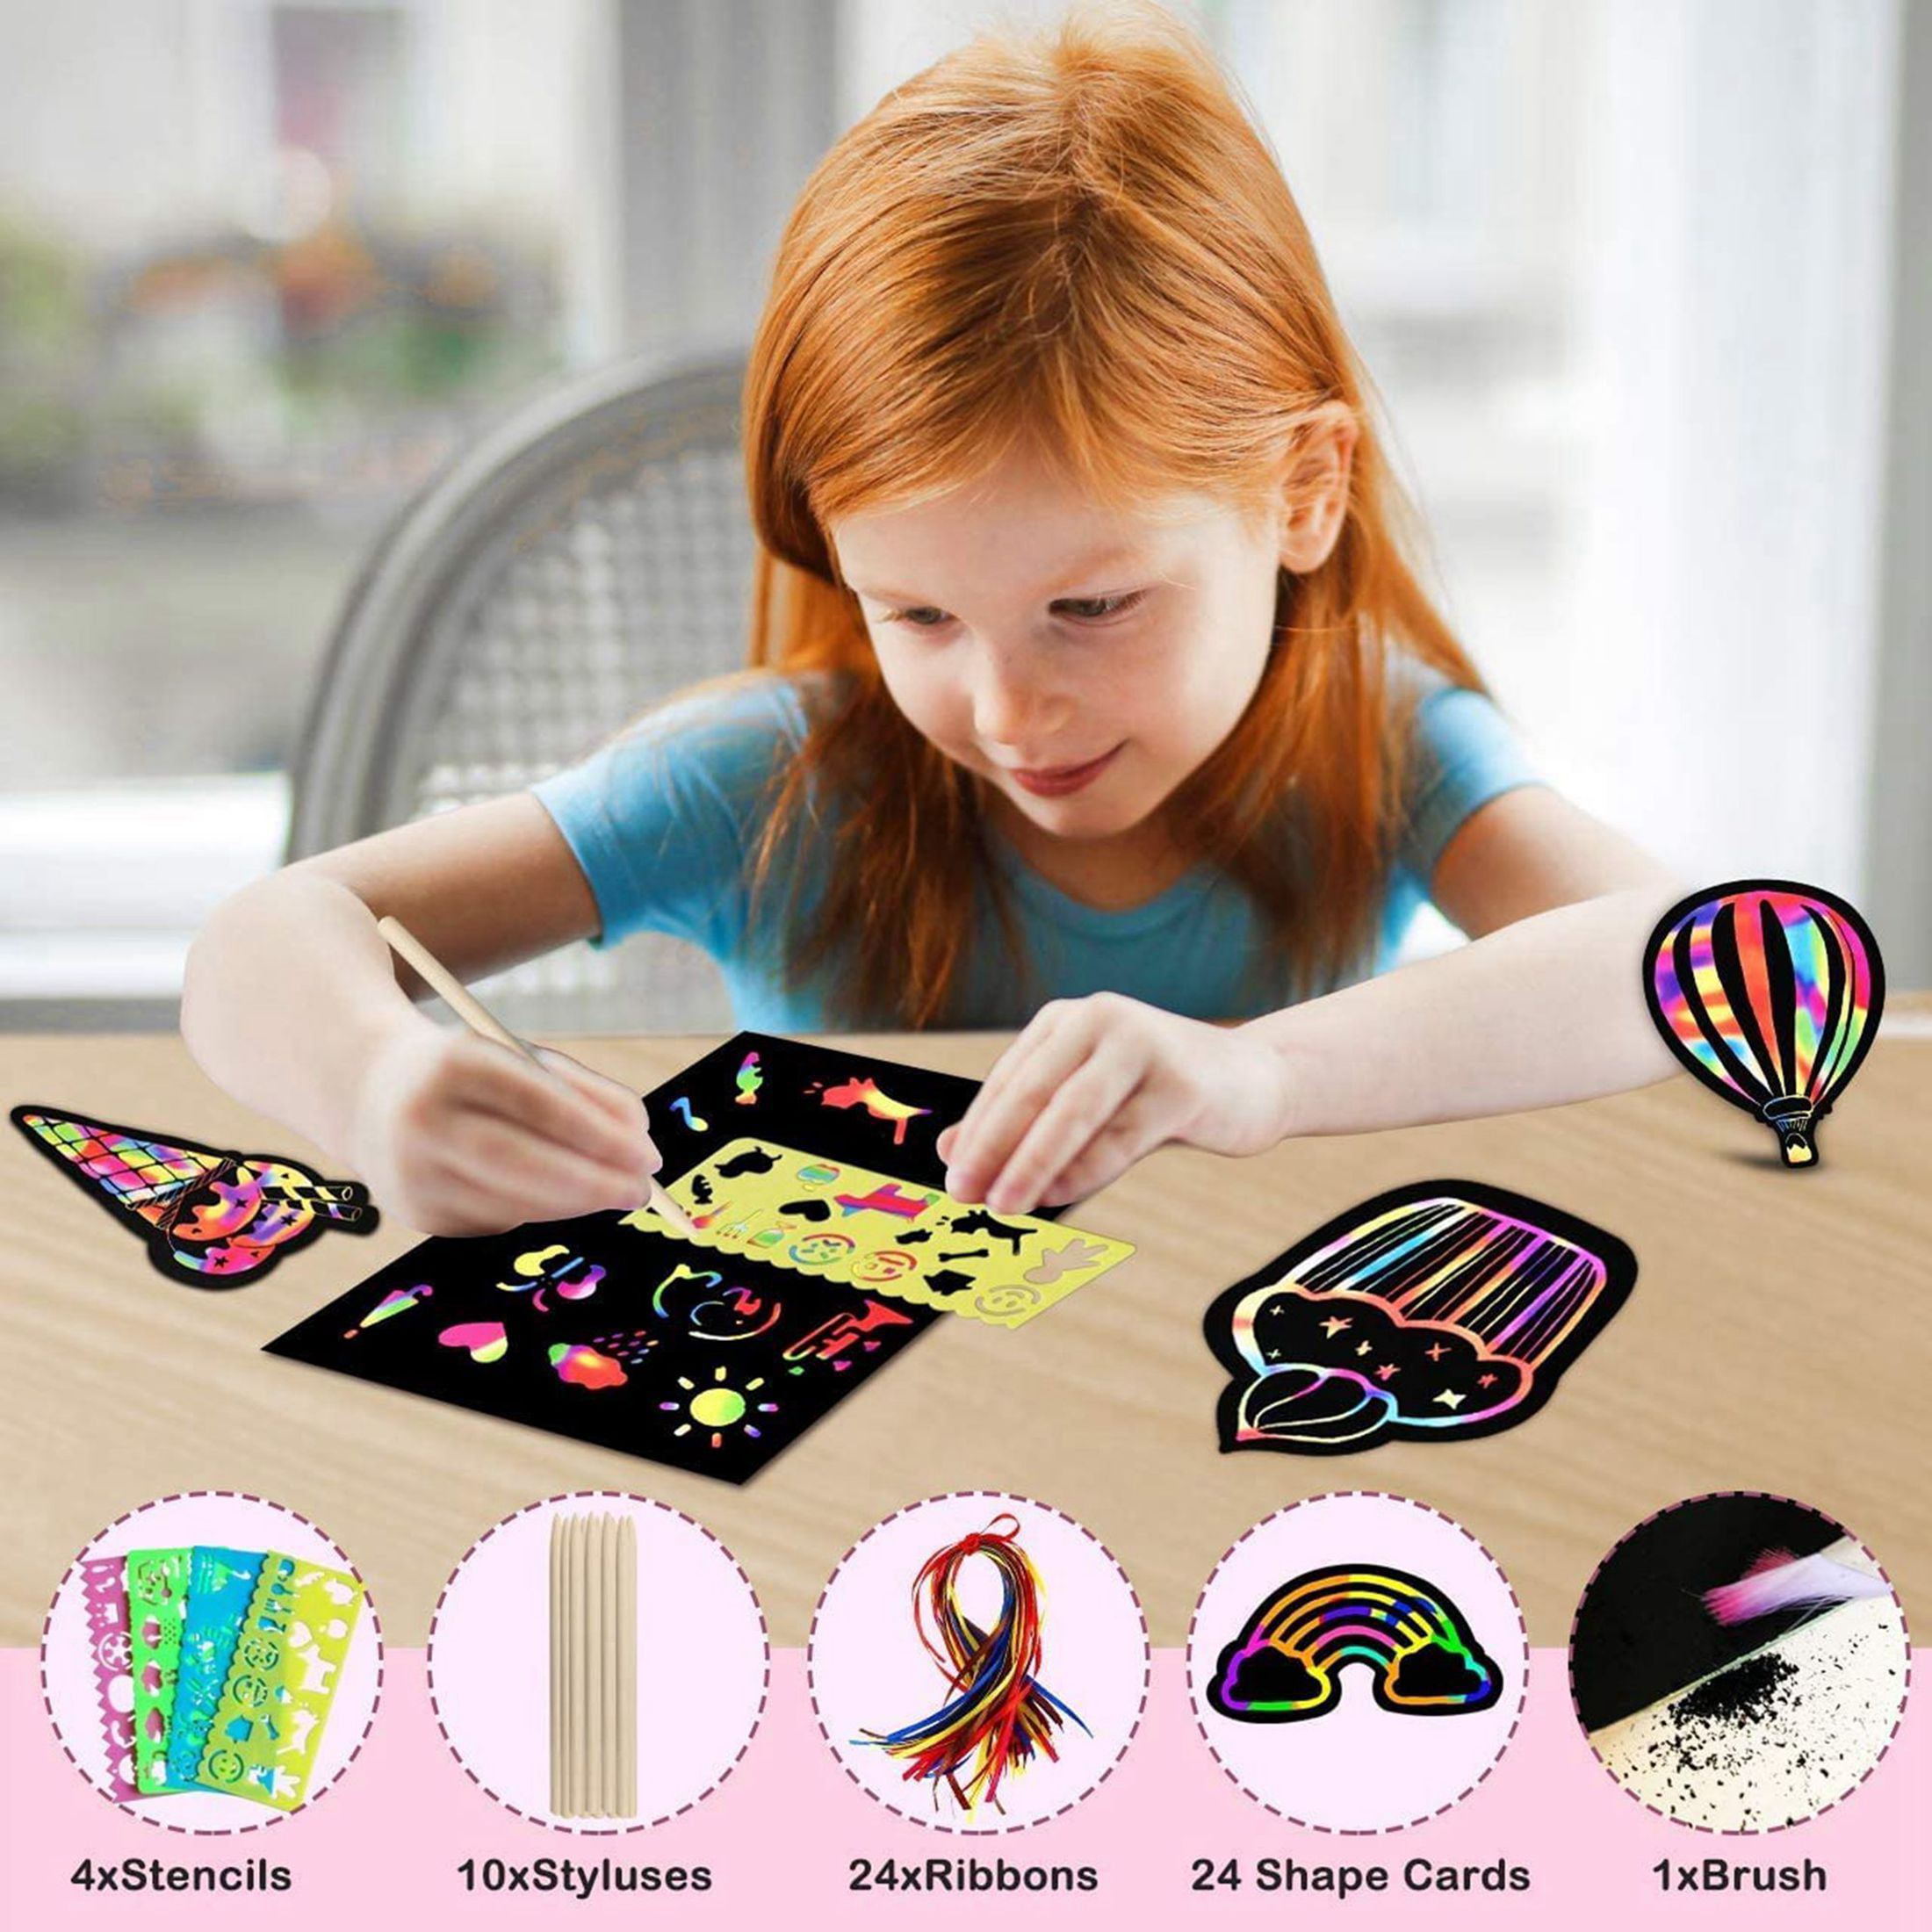 Lava Crafts Scratch Art Set for Kids - 50 Scratch Paper in 3 Great Styles -  Rainbow, Silver & Rainbow Holographic, 4 Unique Stencils for Kids, 6